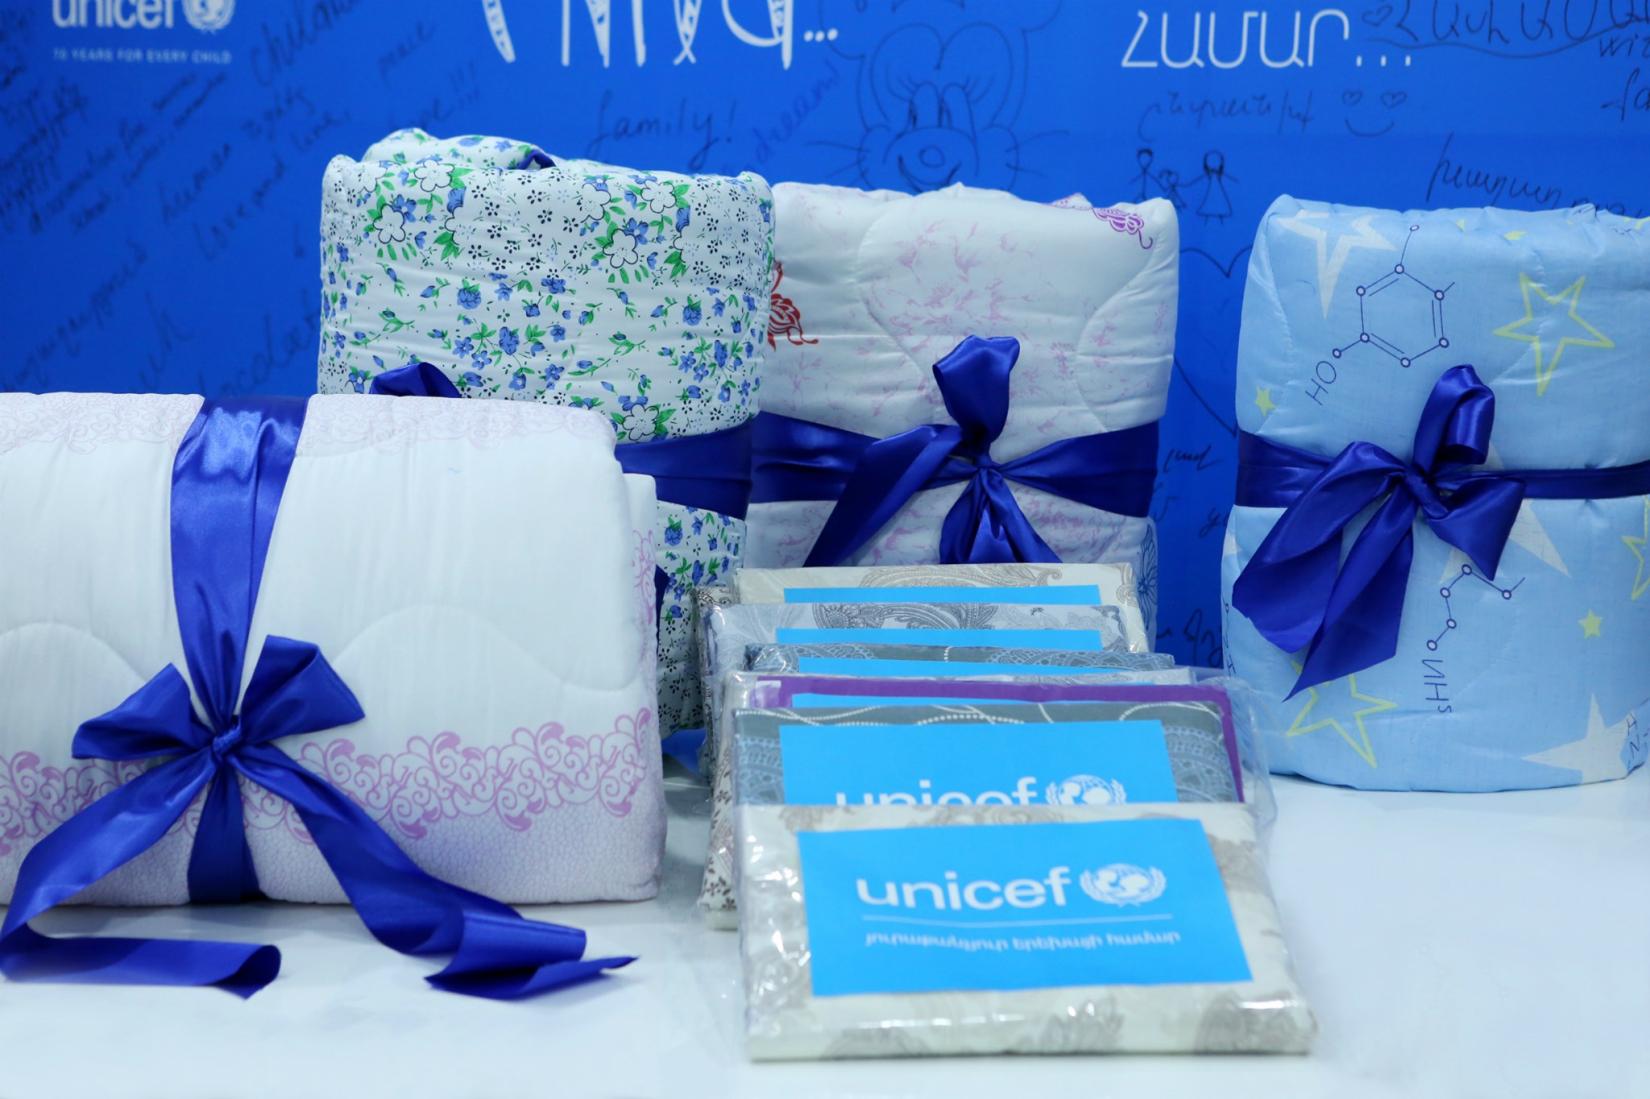 Sets of warm blankets and bed linen provided by UNICEF.